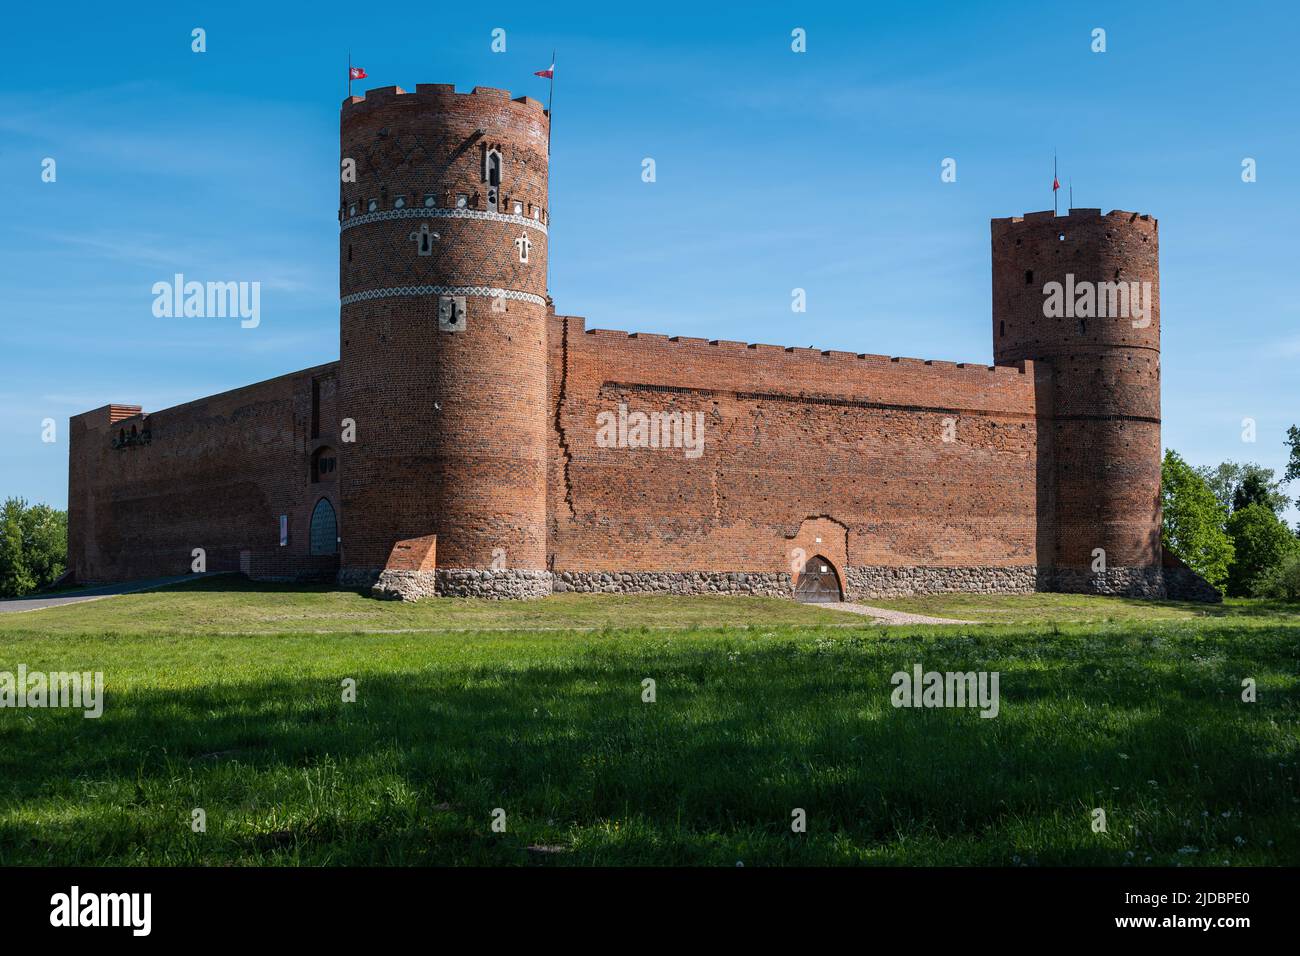 Castle of the Masovian Dukes in Ciechanow, Poland, built in the fourteenth to fifteenth century by the Masovian Duke Siemowit III. Stock Photo